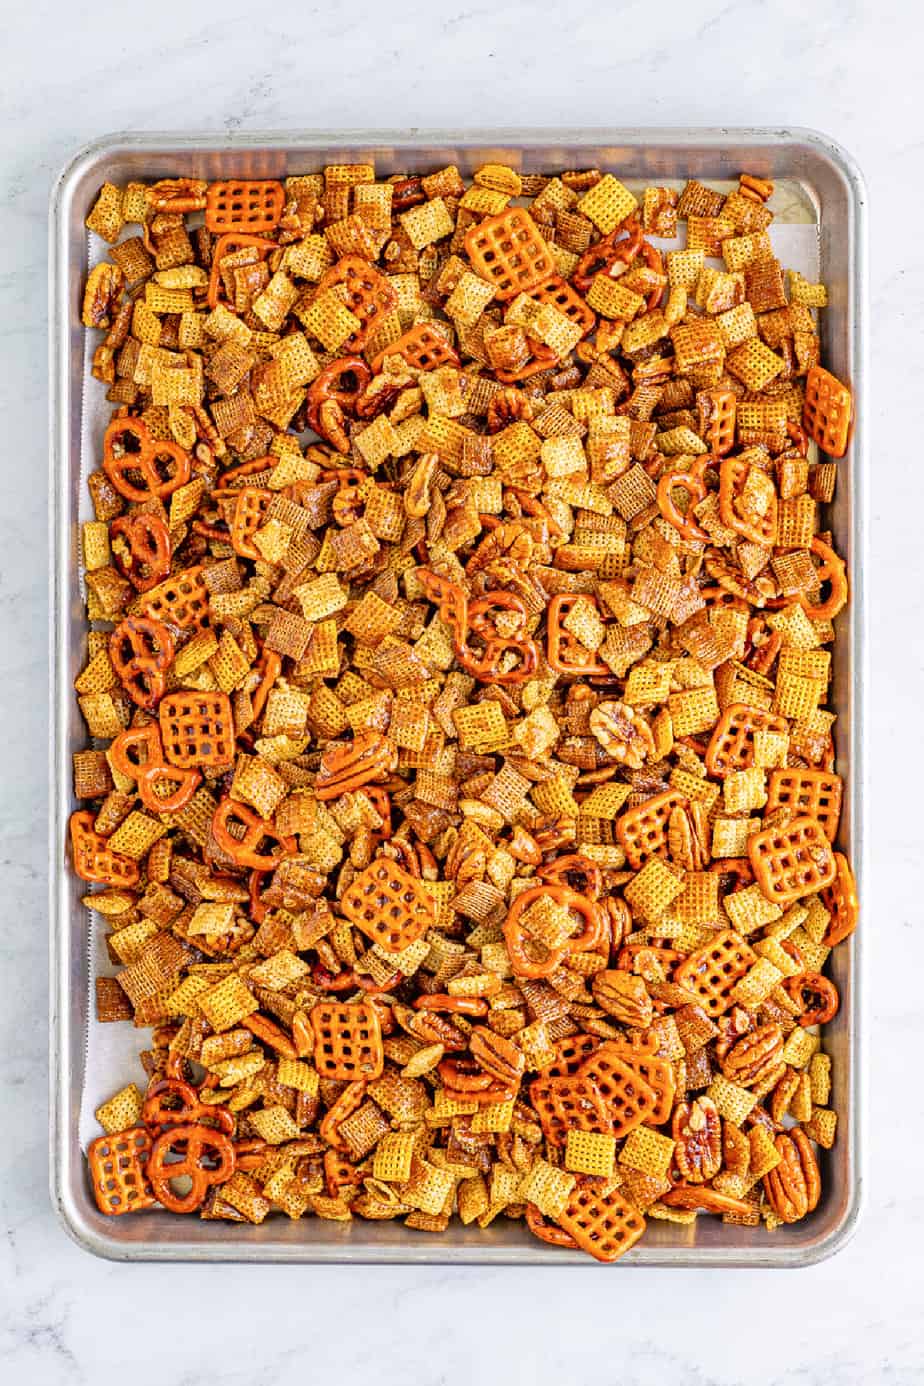 Chex cereal, pretzels, pecans after being baked on a sheetpan from overhead on the counter.